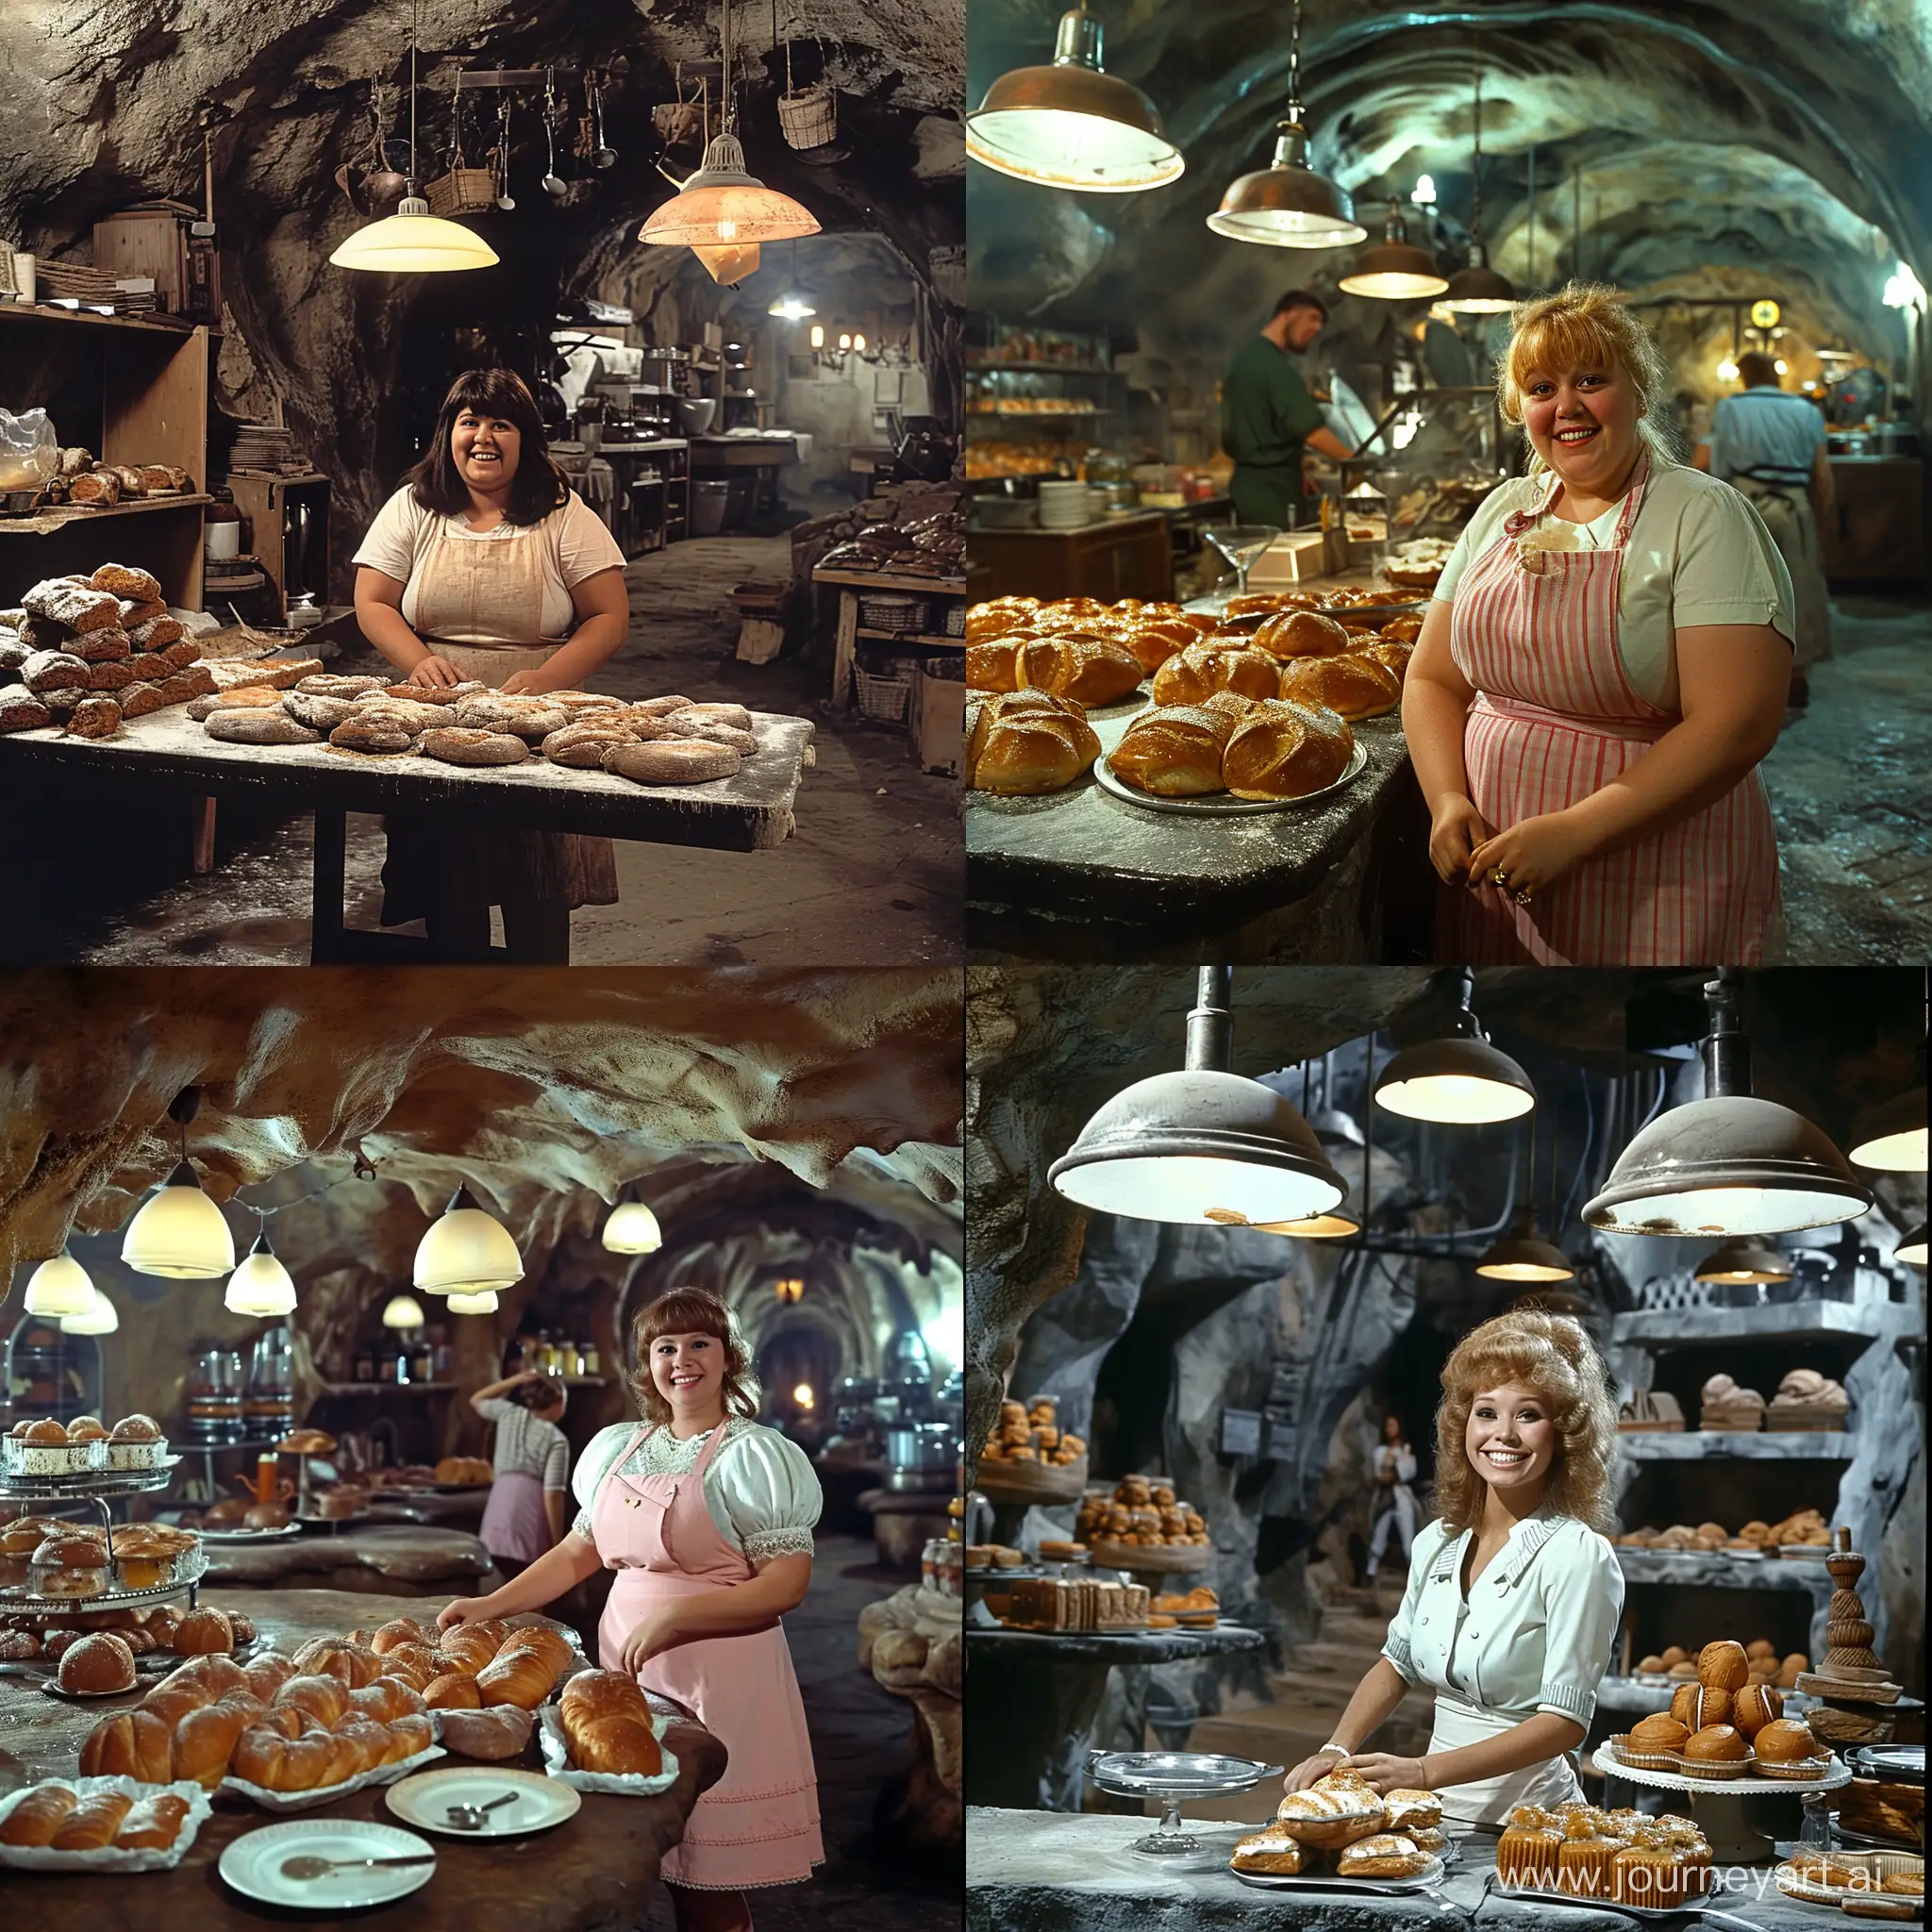 Charming-Overweight-Cook-in-Underground-Fantasy-BakeryDining-Room